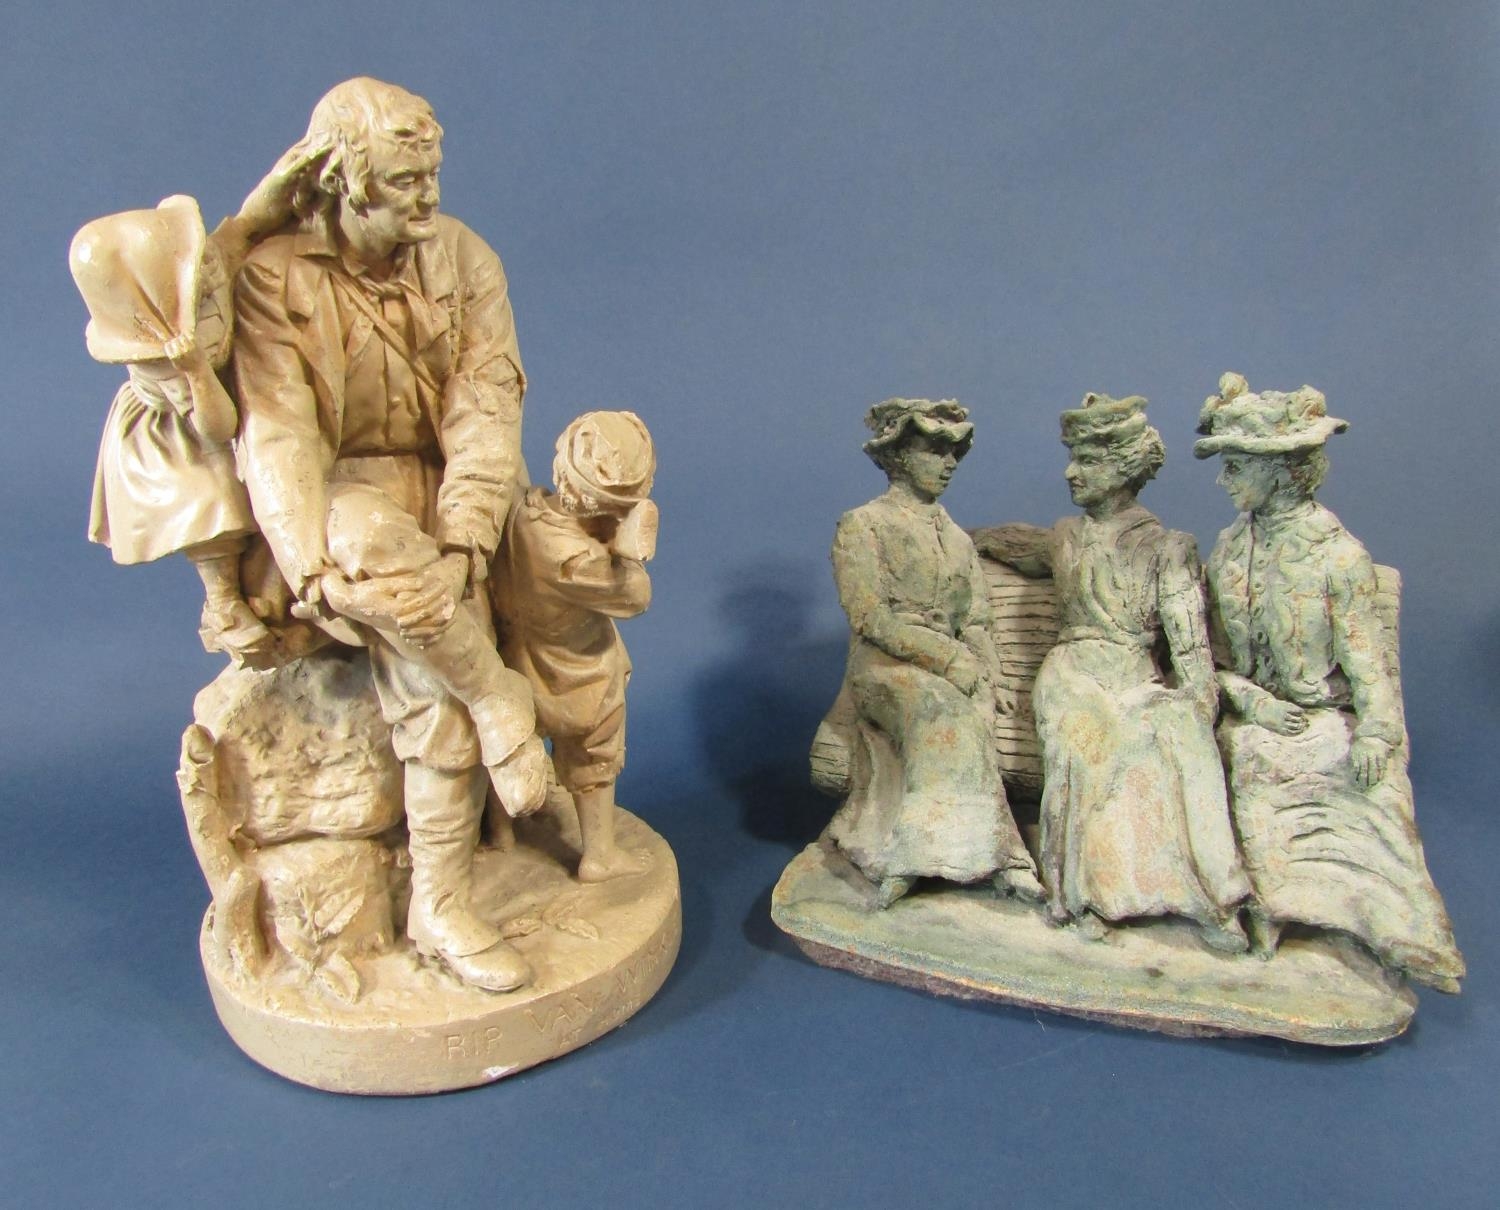 A large painted plaster figure group of Rip Van Winkle 'At Home' with matt glazed finish by John